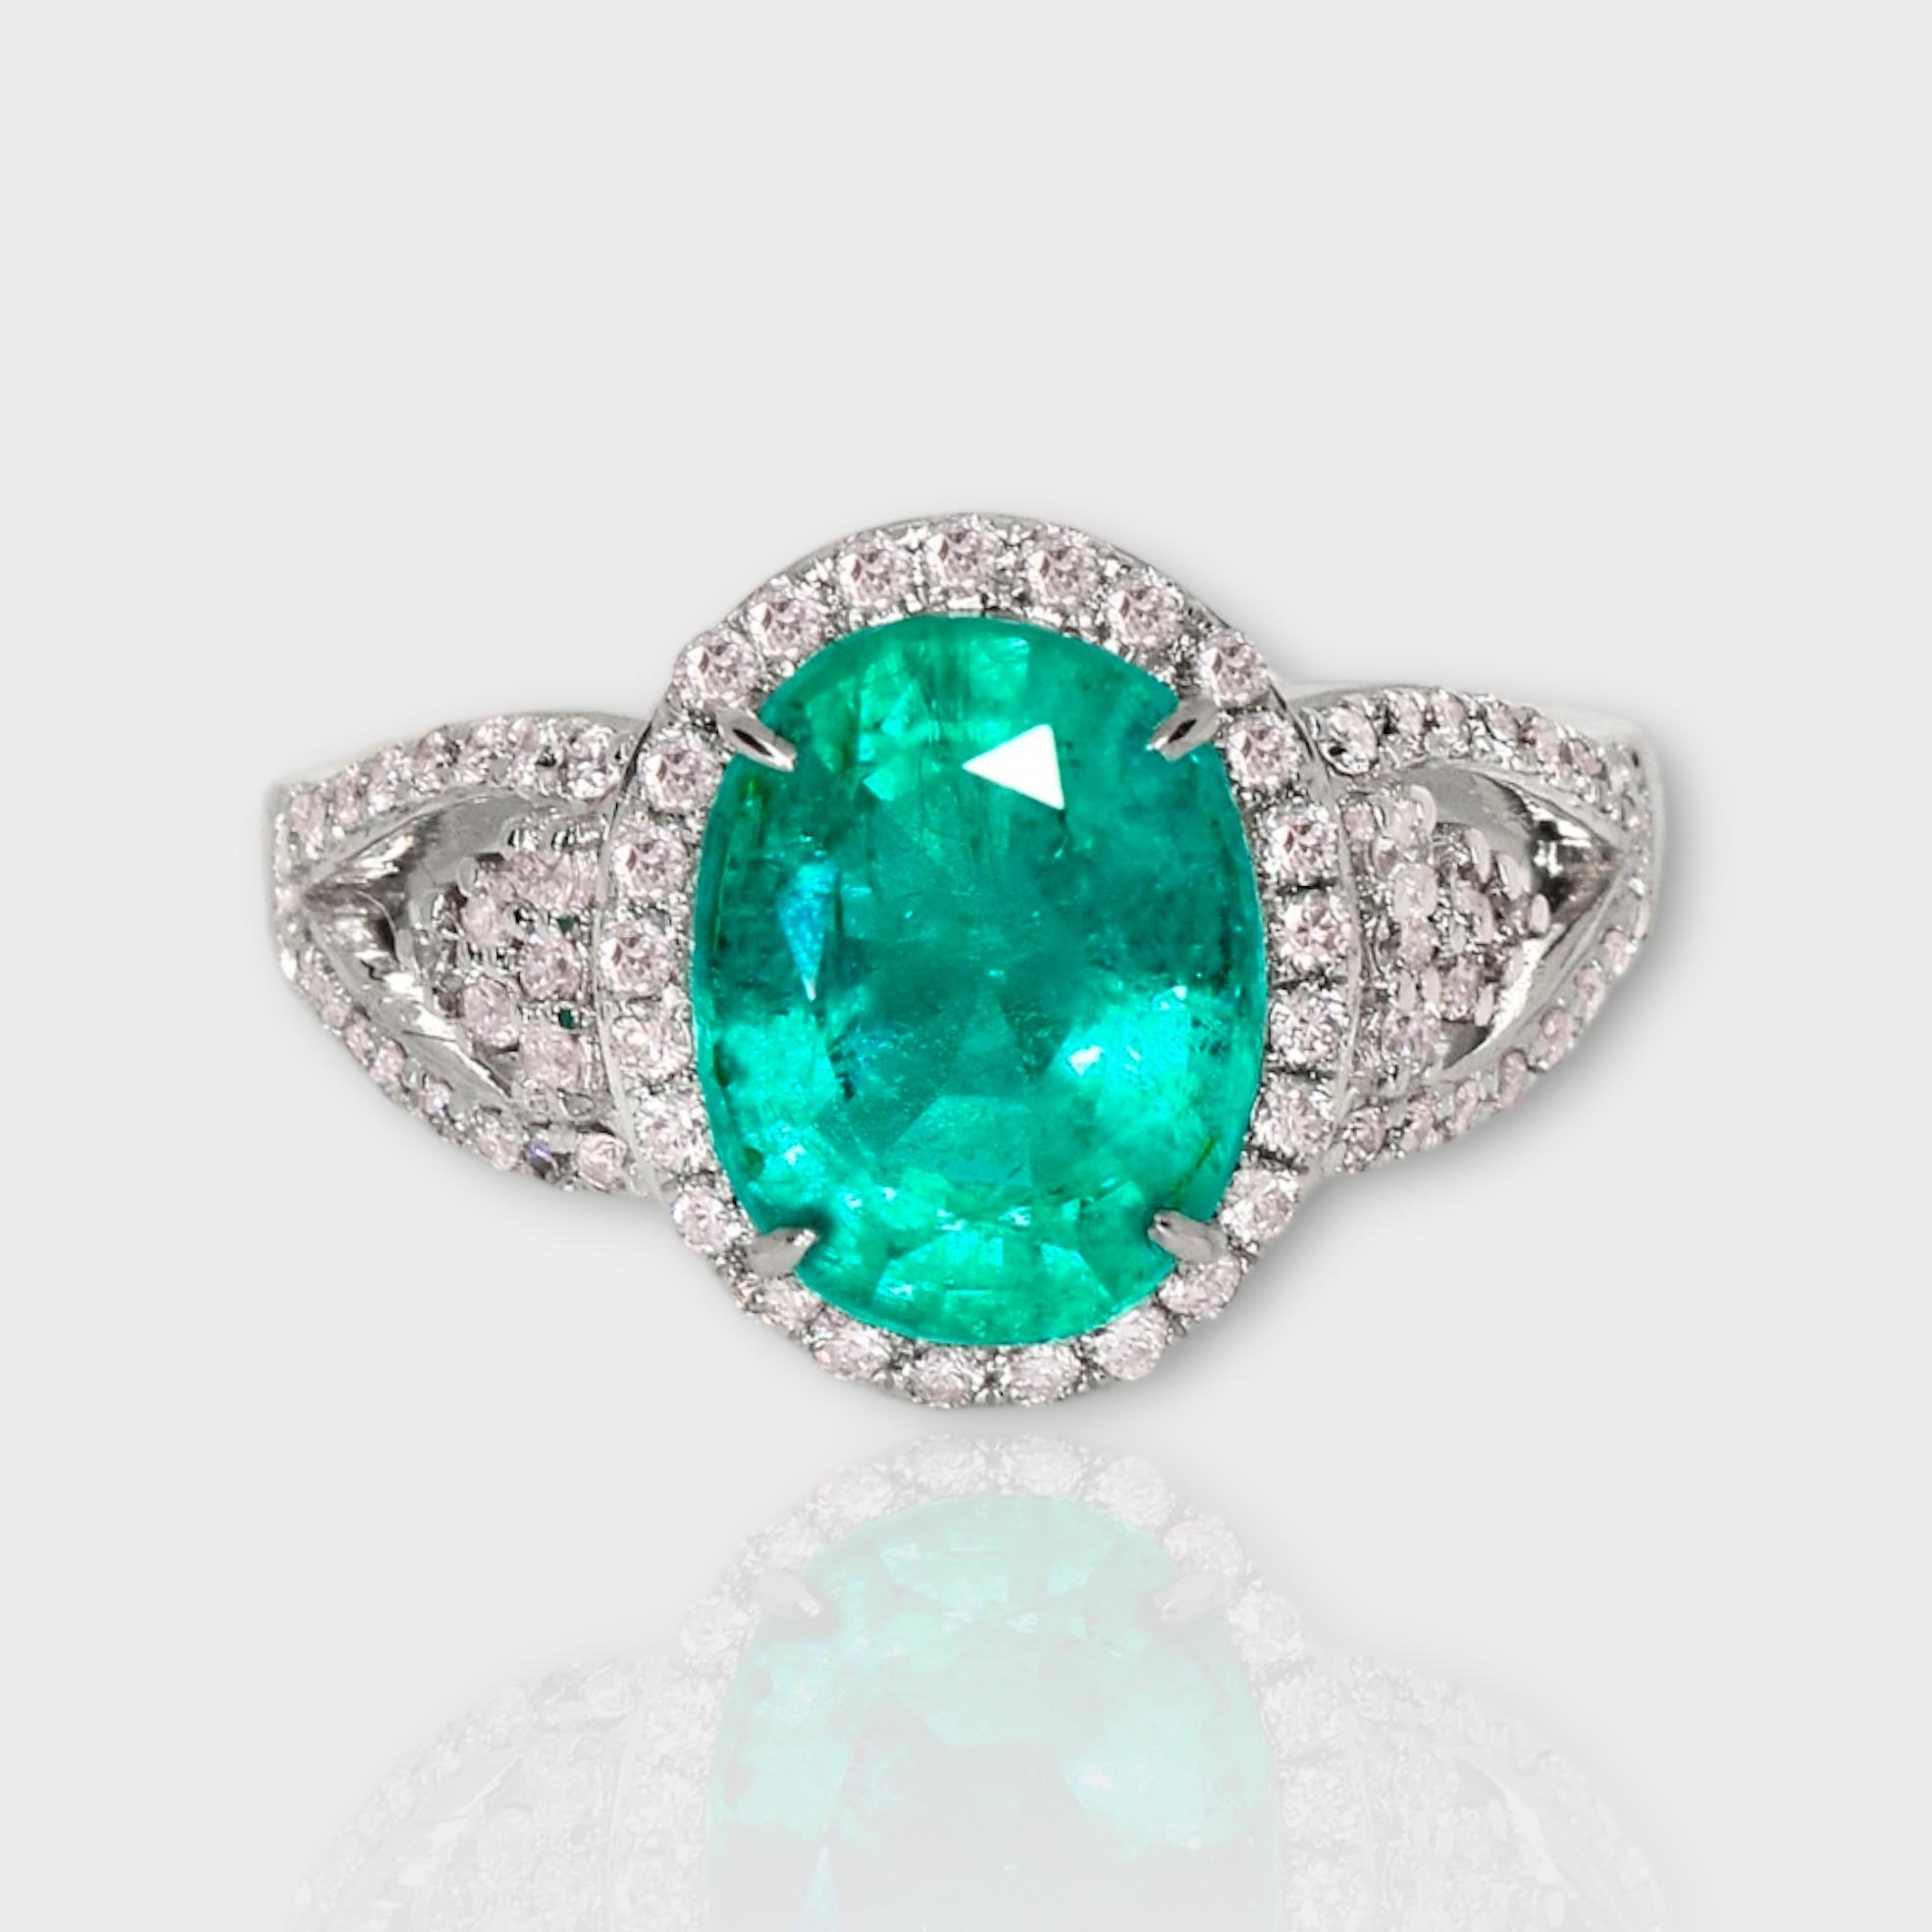 *18K White Gold 2.85 ct Emerald&Pink Diamonds Antique Art Deco Style Engagement Ring*

A natural Zambia green emerald weighing 2.85 ct is set on an 18K white gold arc deco design band with natural pink diamonds weighing 0.47 ct.

The good-quality